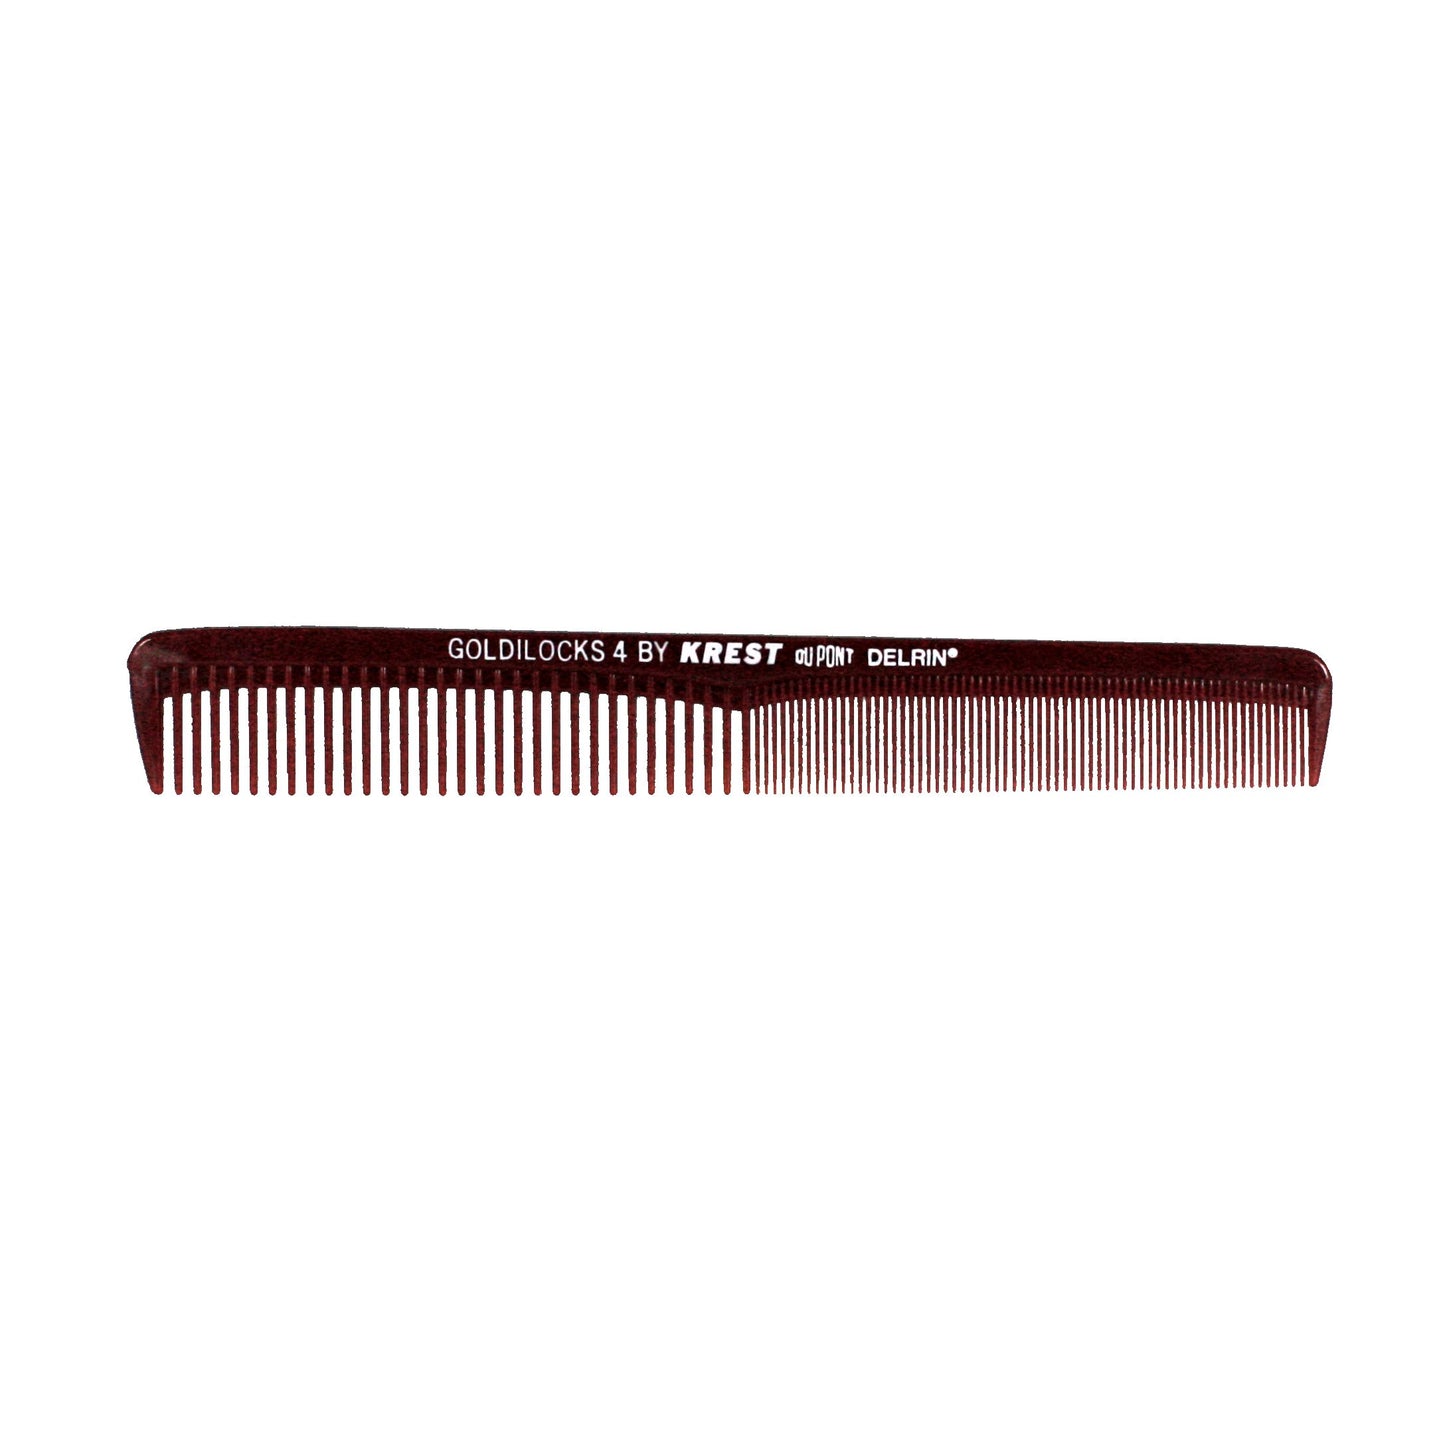 7in, Delrin Plastic, Styling Comb - CLOSEOUT, LIMITED STOCK AVAILABLE